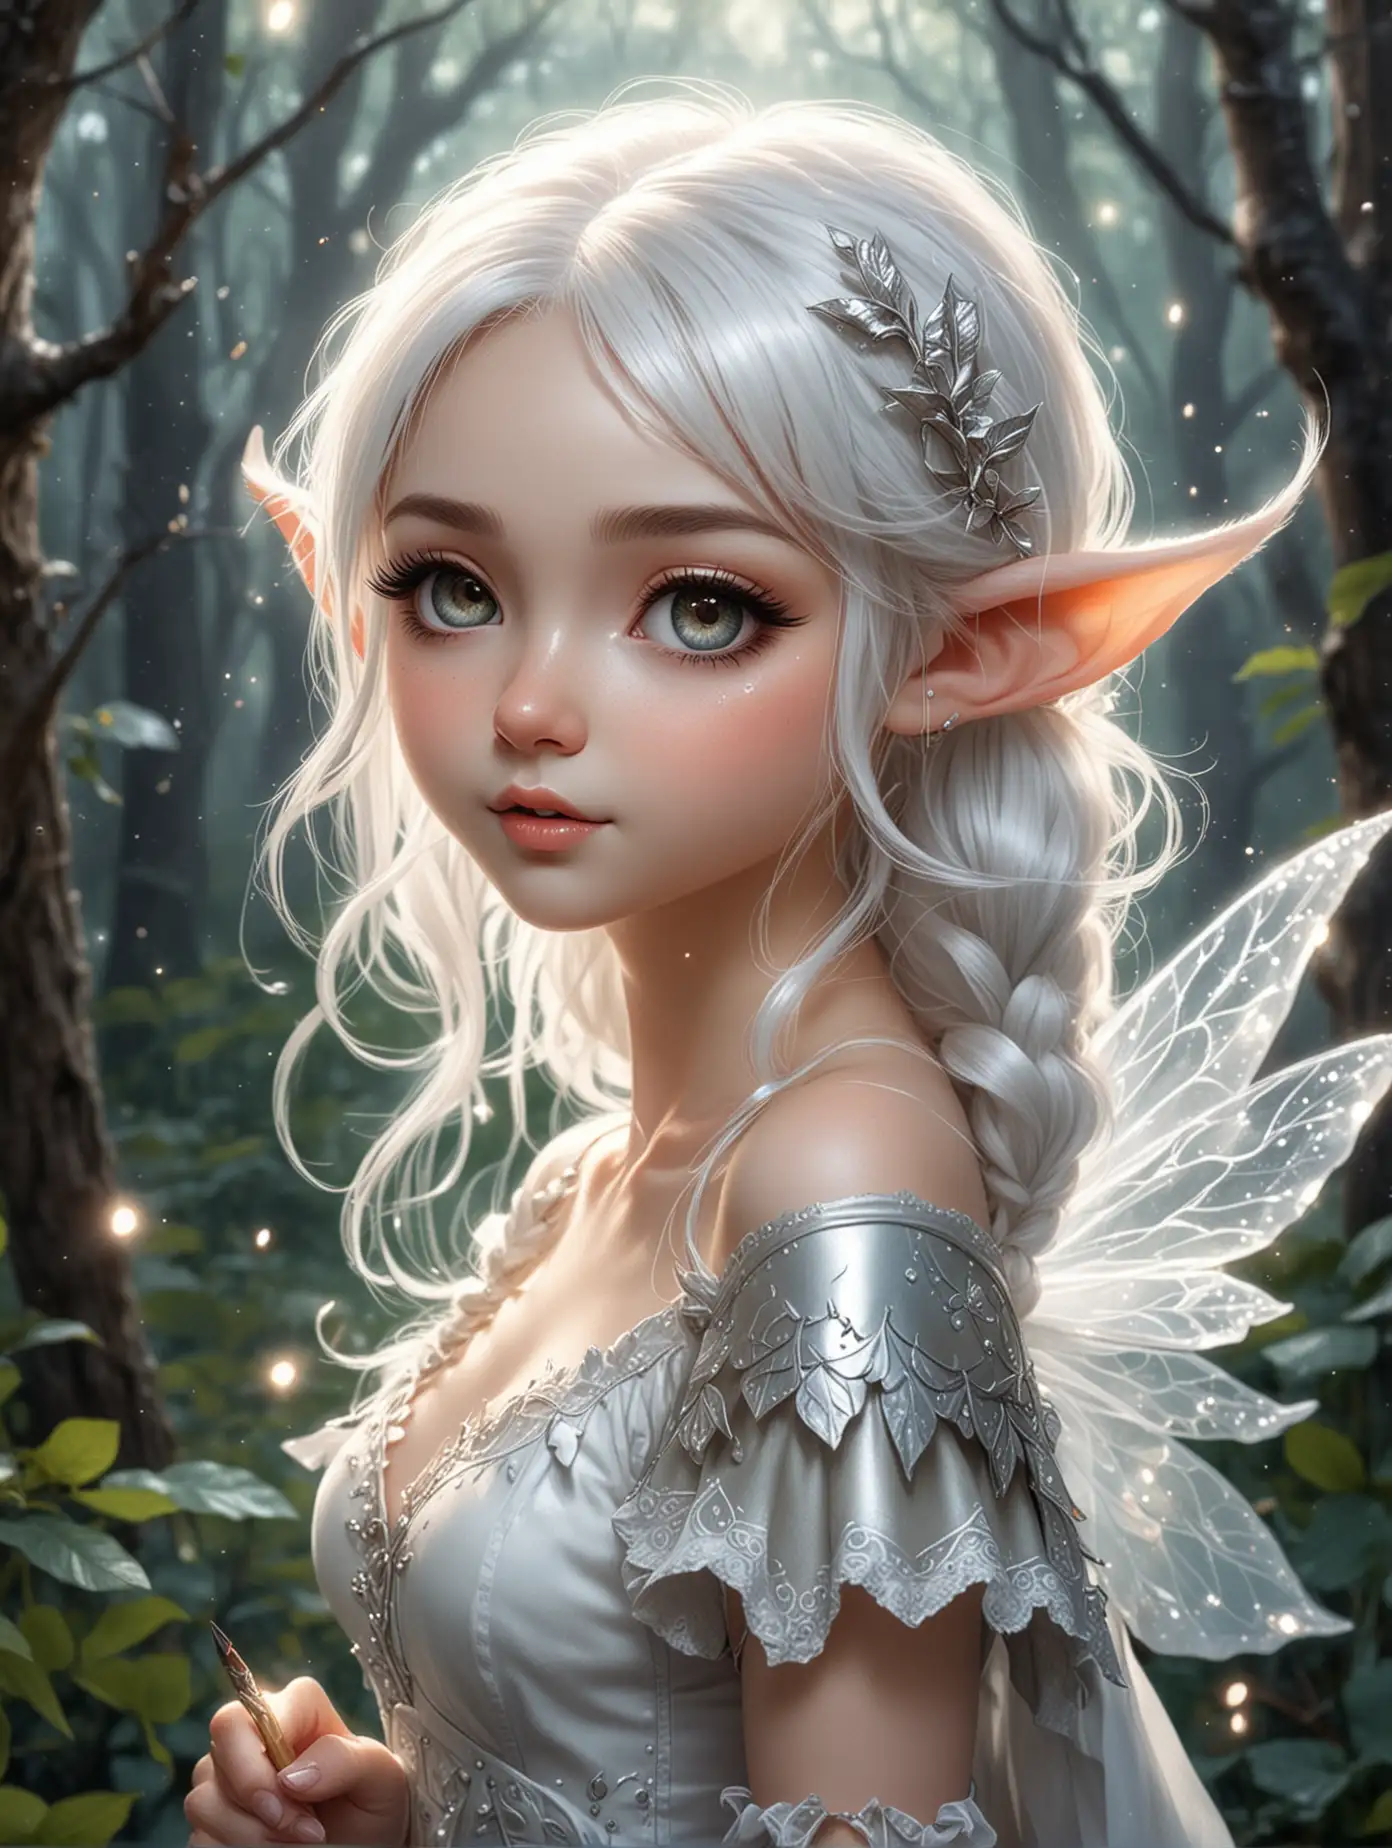 Realistic Portrait of a Beautiful Elf Fairy Chibi Girl in Magical Forest